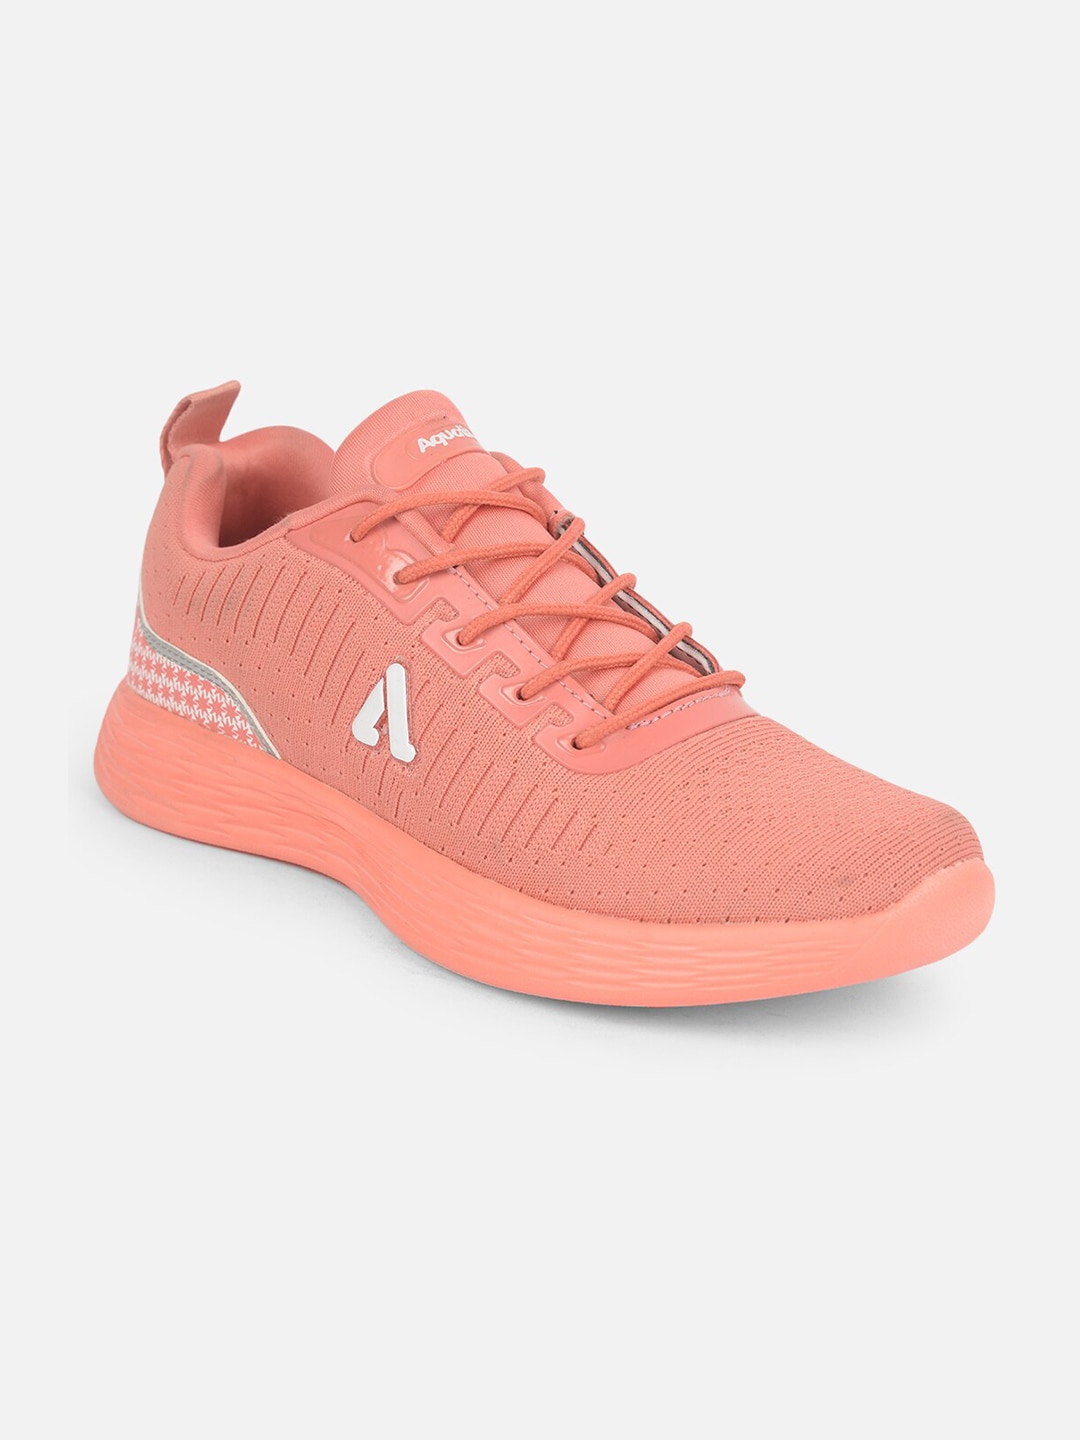 Aqualite Women Peach-Coloured Mesh Running Non-Marking Shoes Price in India